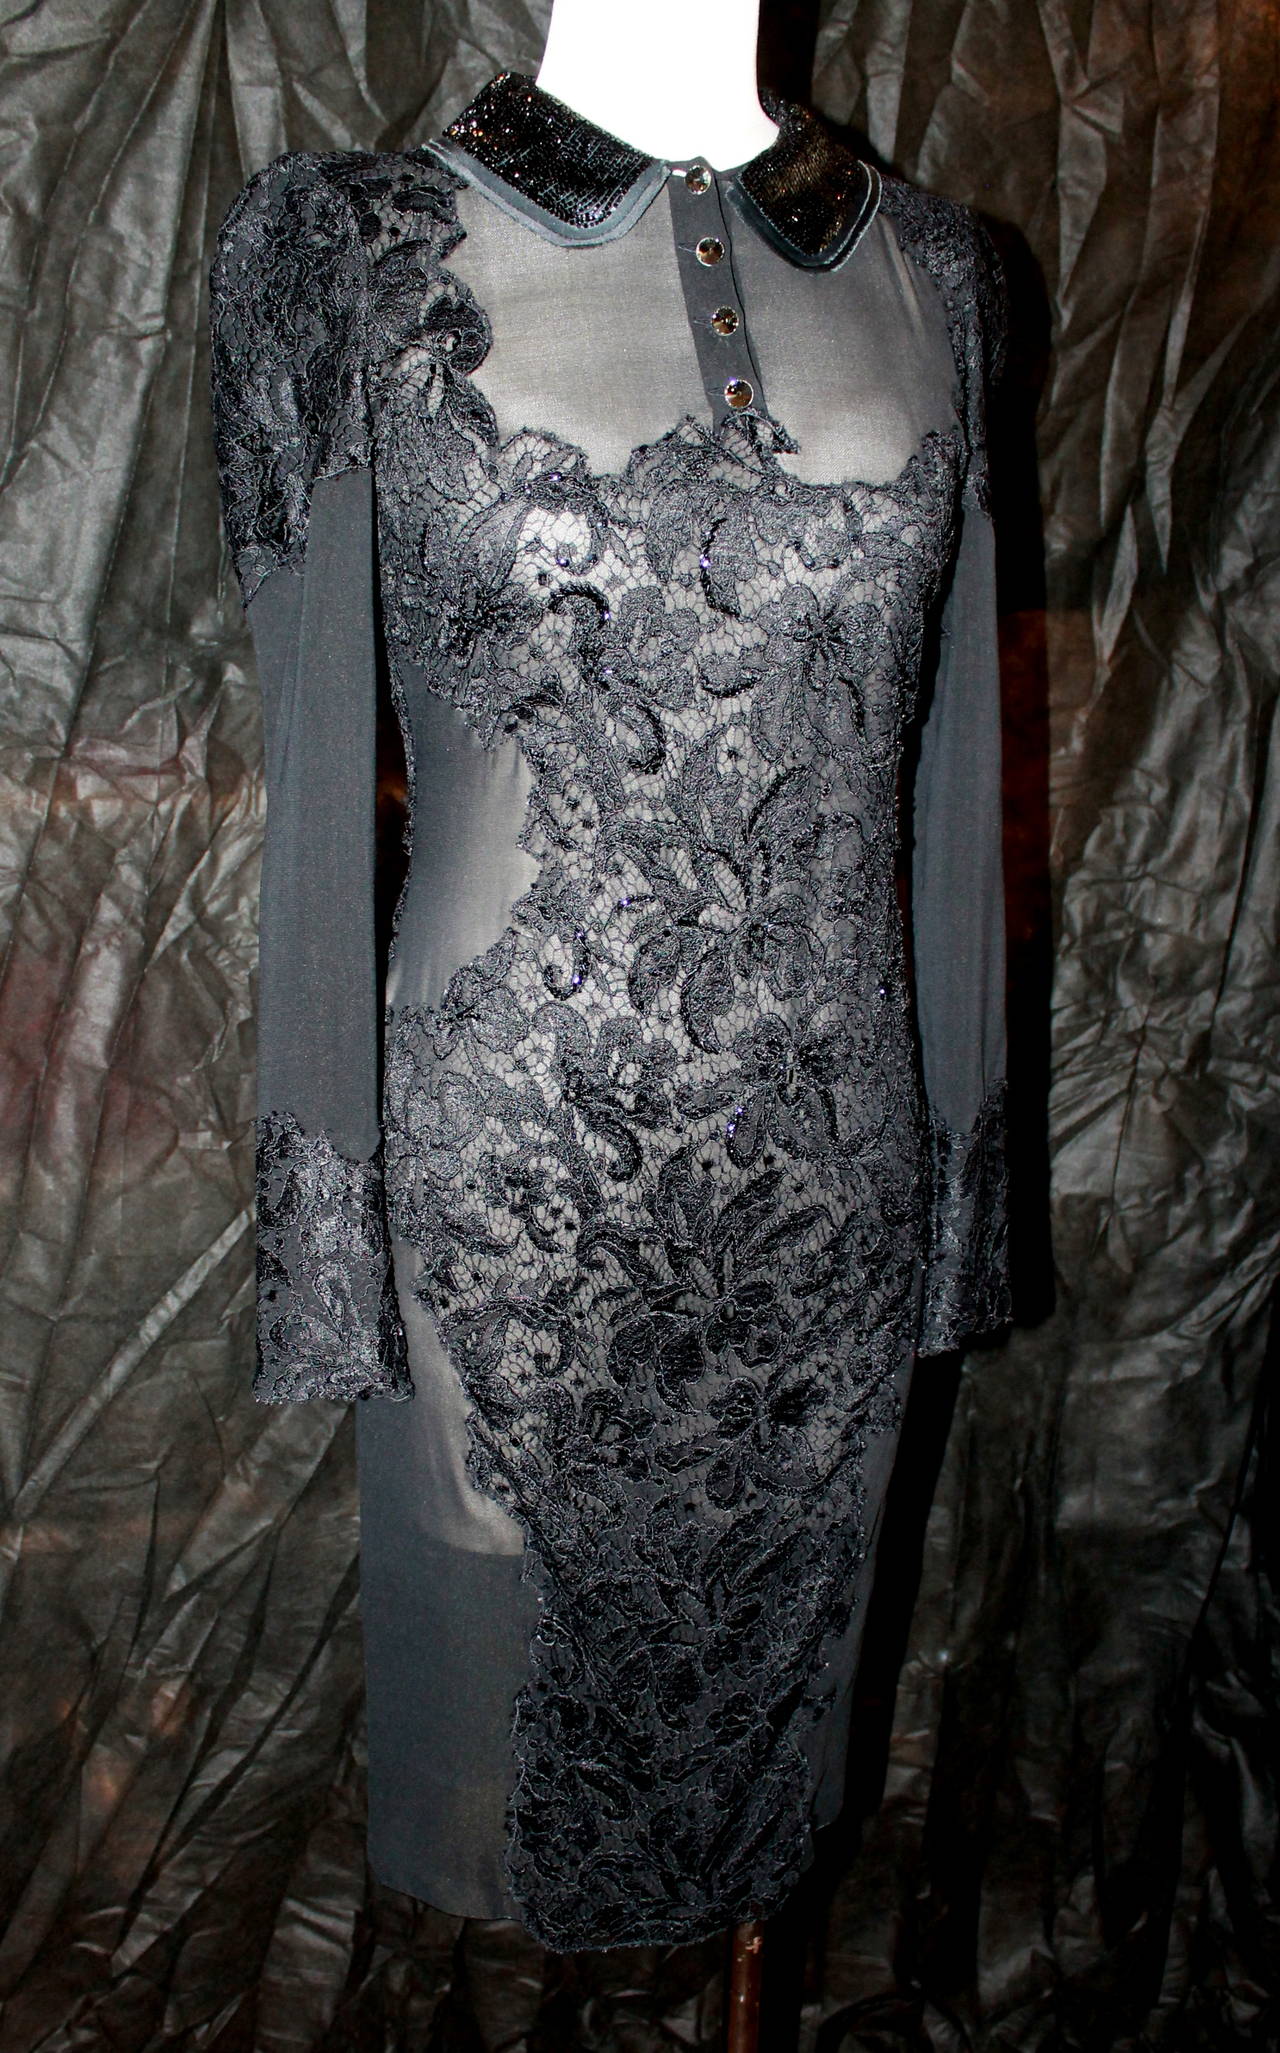 Emilio Pucci Black Lace Sheer Long Sleeve Dress - 6. This dress is in excellent condition with nearly no signs of wear. It is a very unique Pucci piece. 

Measurements:
Bust- 32.5
Waist- 28